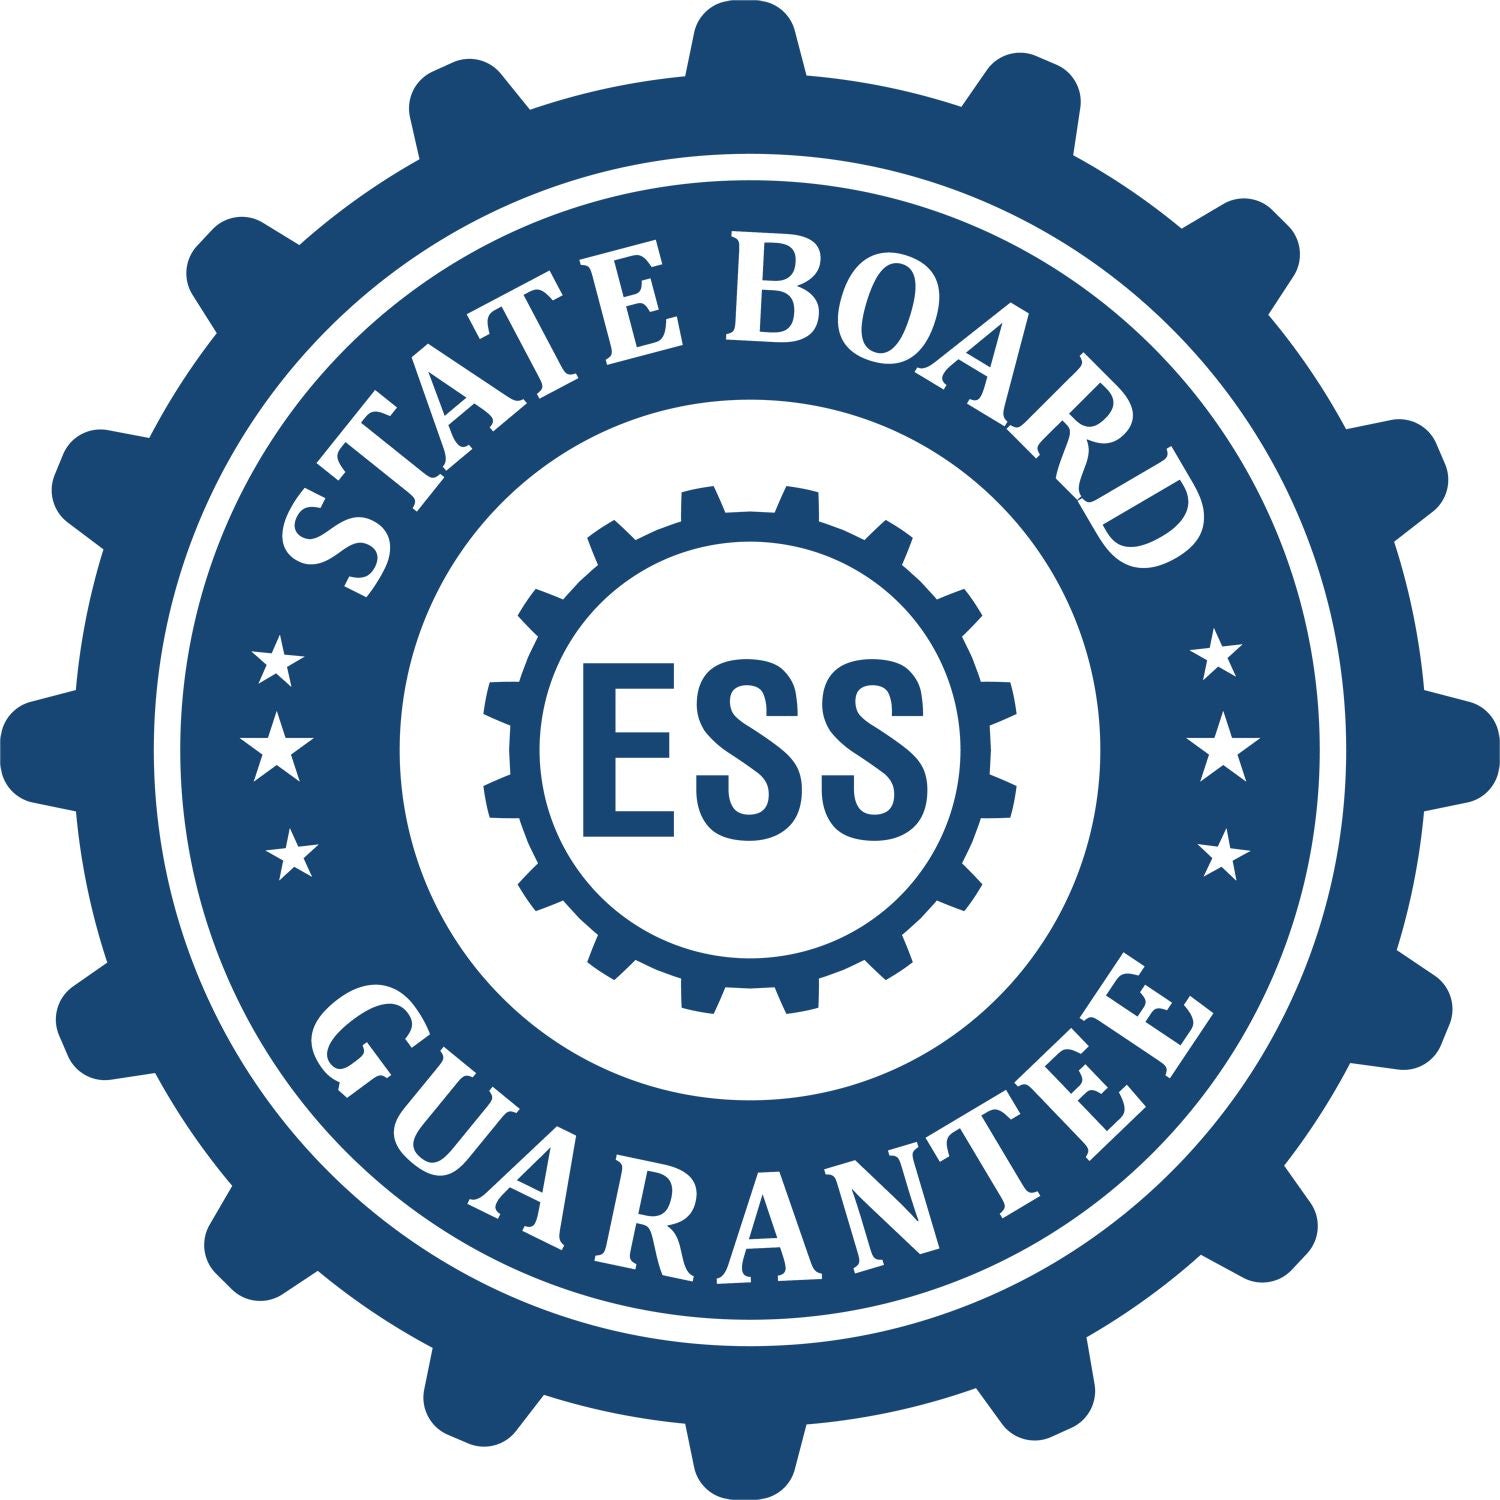 An emblem in a gear shape illustrating a state board guarantee for the Oregon Engineer Desk Seal product.